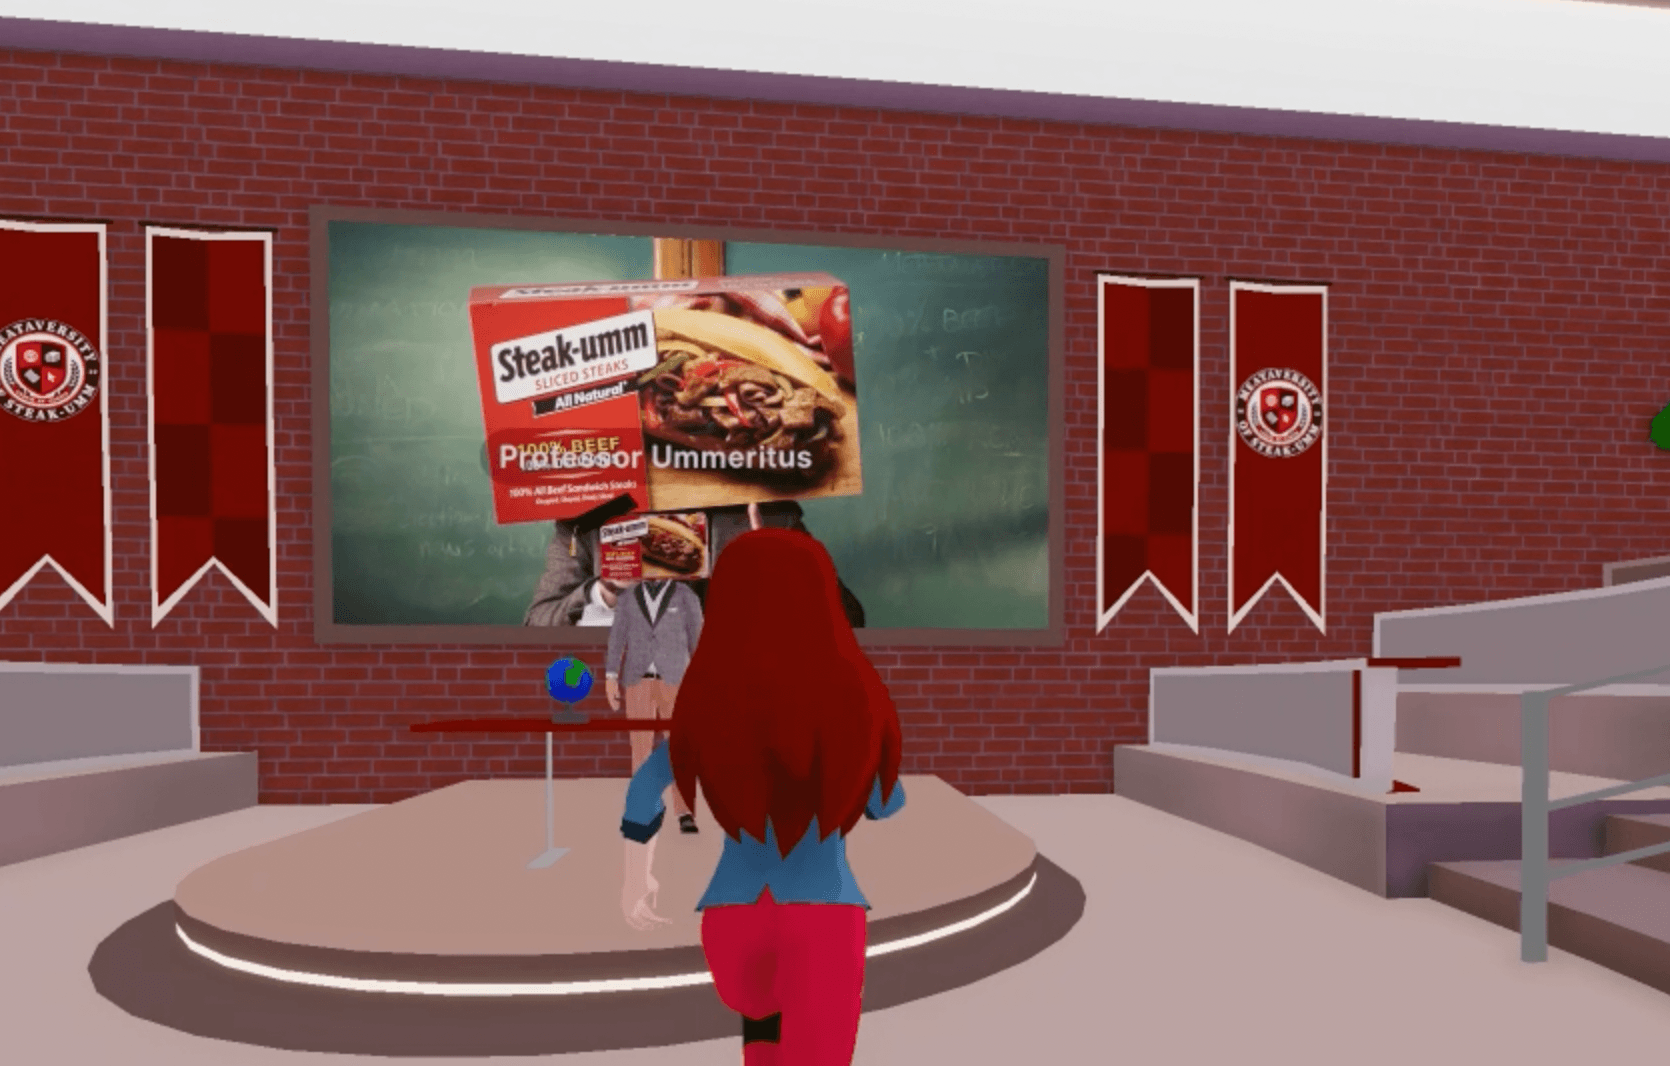 Steak-Umm Meataversity Launches In Decentraland to Combat Misinformation - Far From Timid